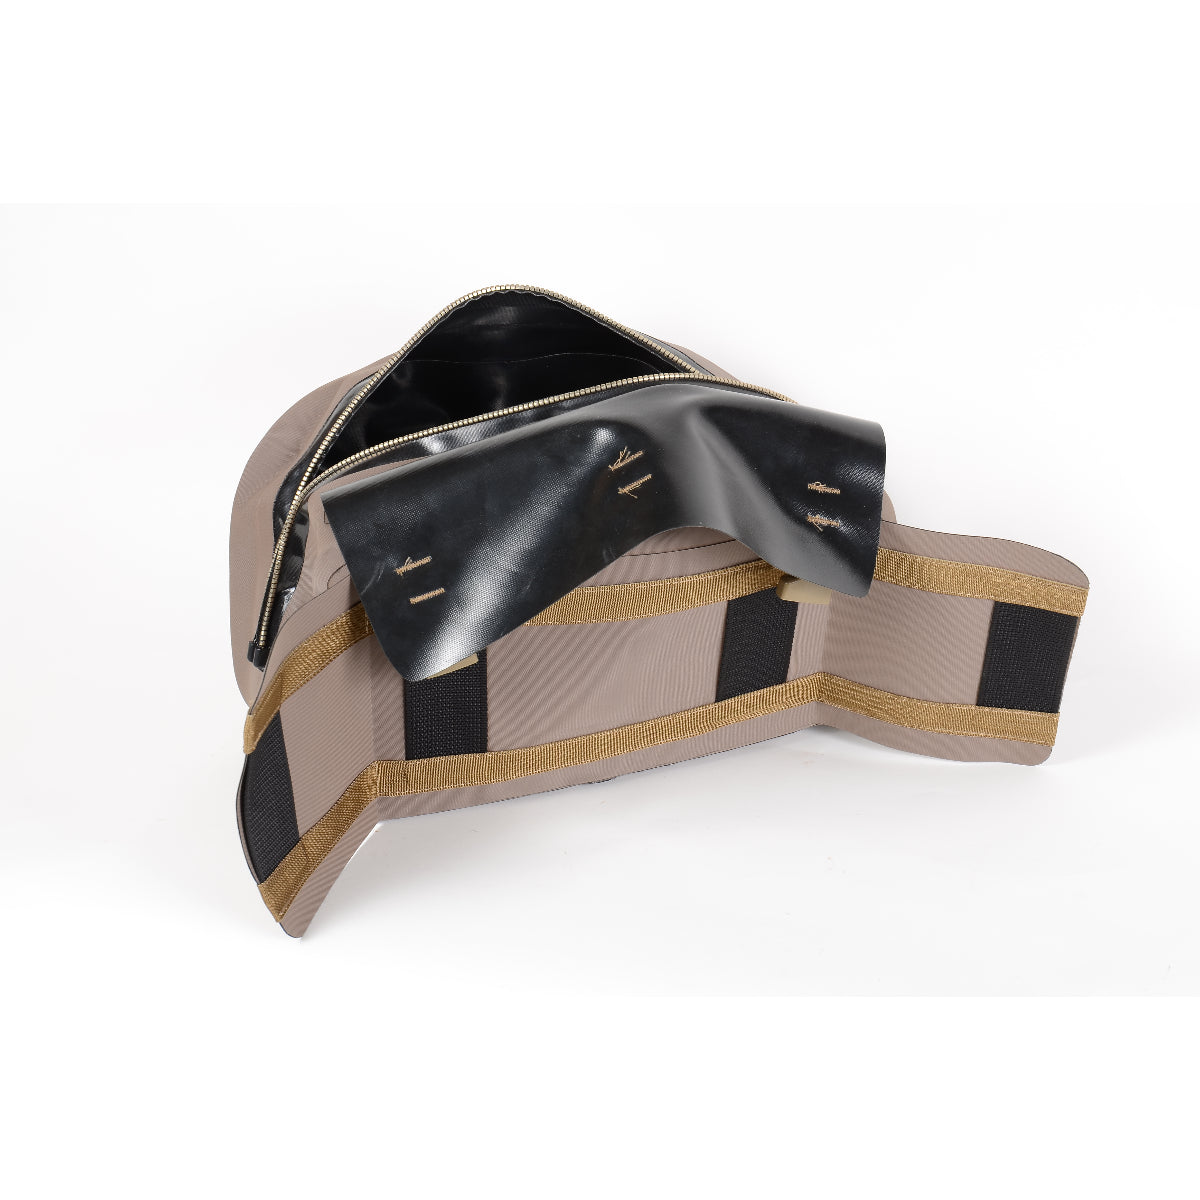 Watershed Airborne Waist Pack